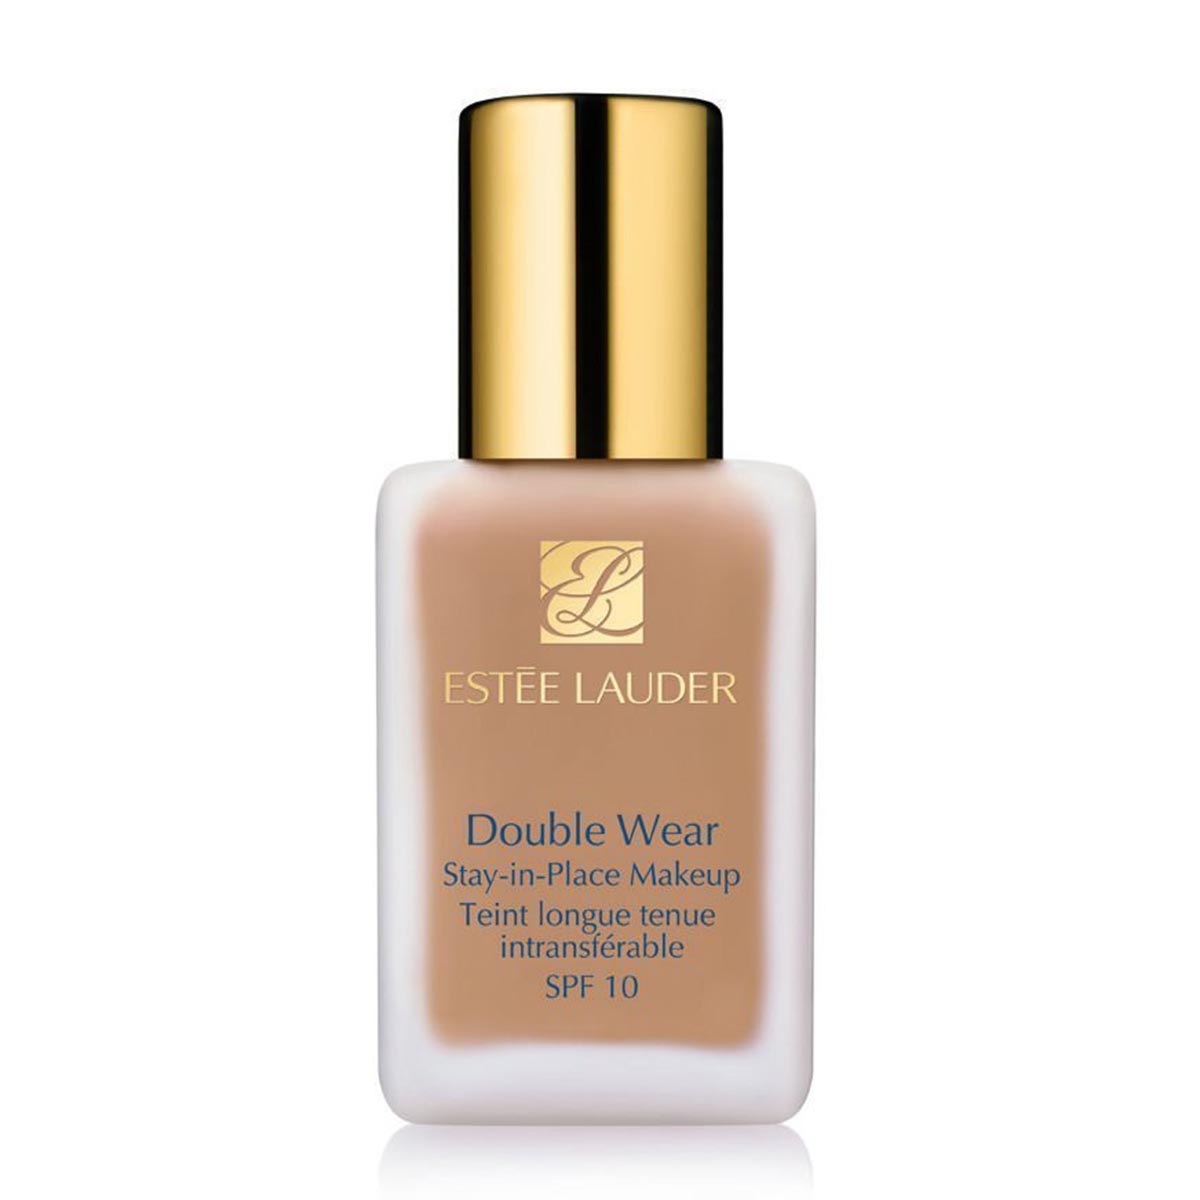 Estee Lauder Double Wear Stay-in-Place Makeup SPF 10/PA++ - Foundation